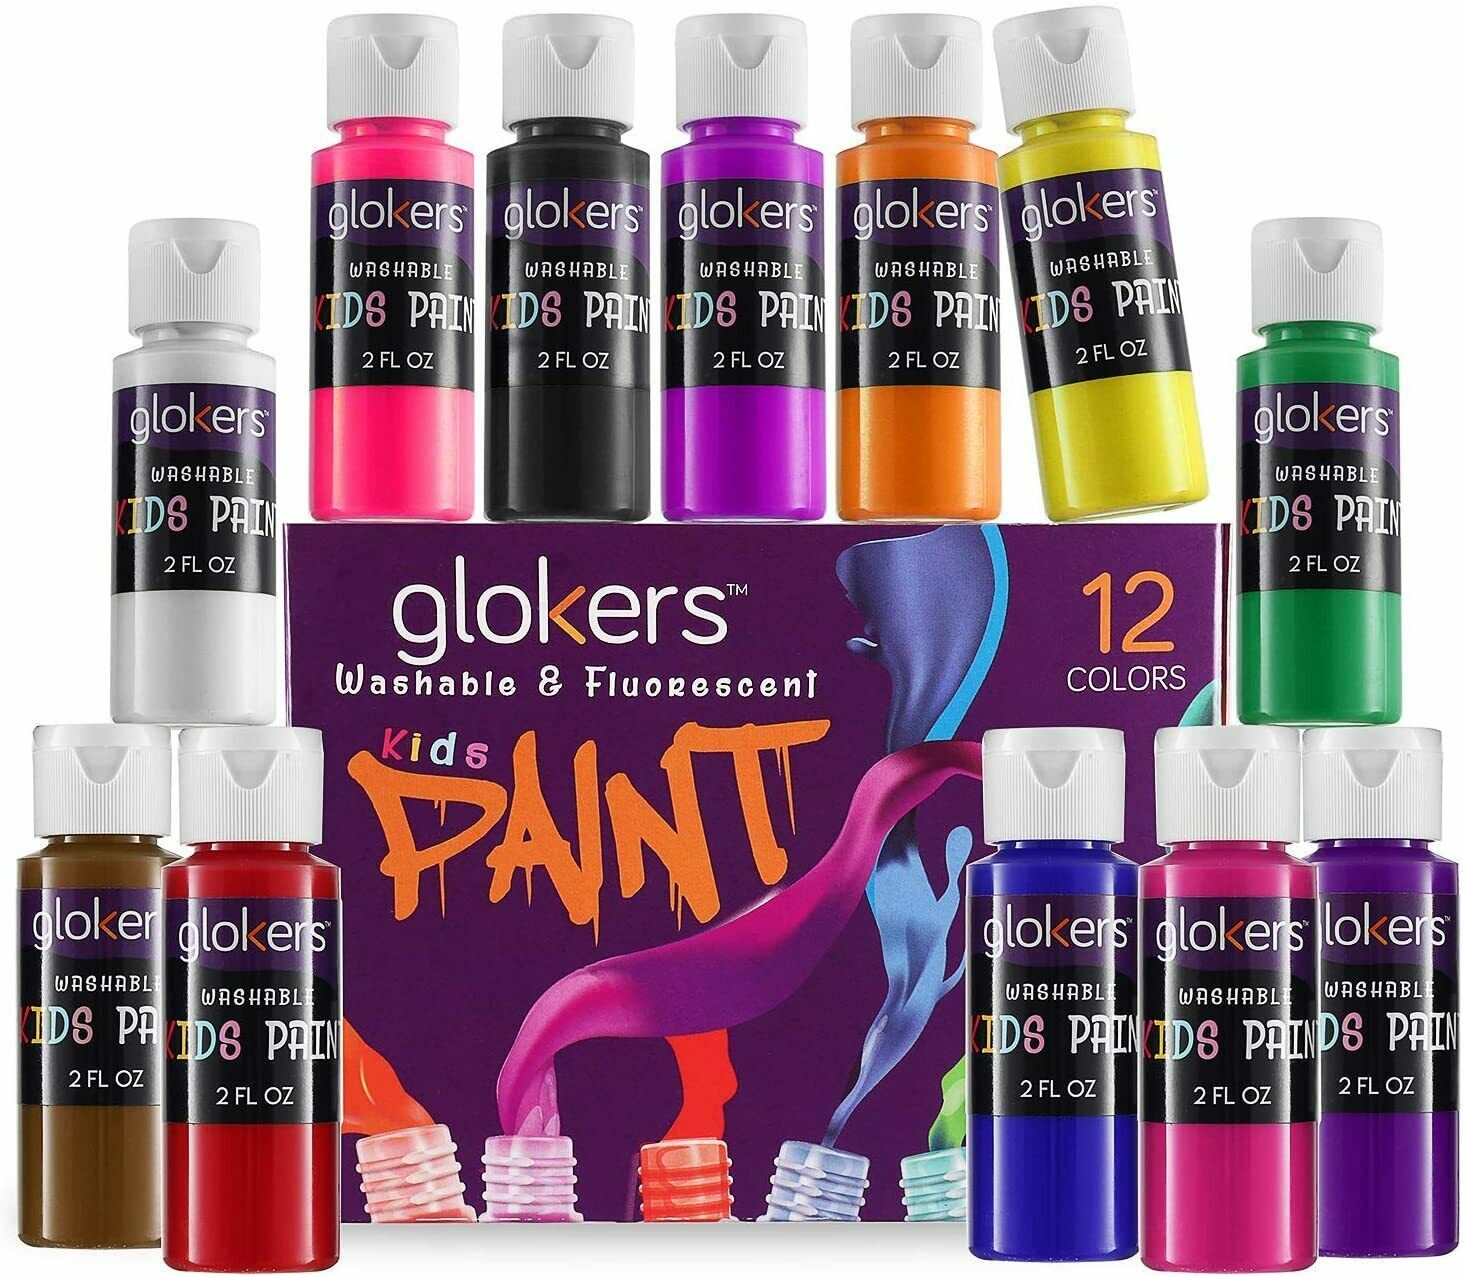 glokers 12 Colors Washable Paint Set for Kids Regular and Fluorescent Colors